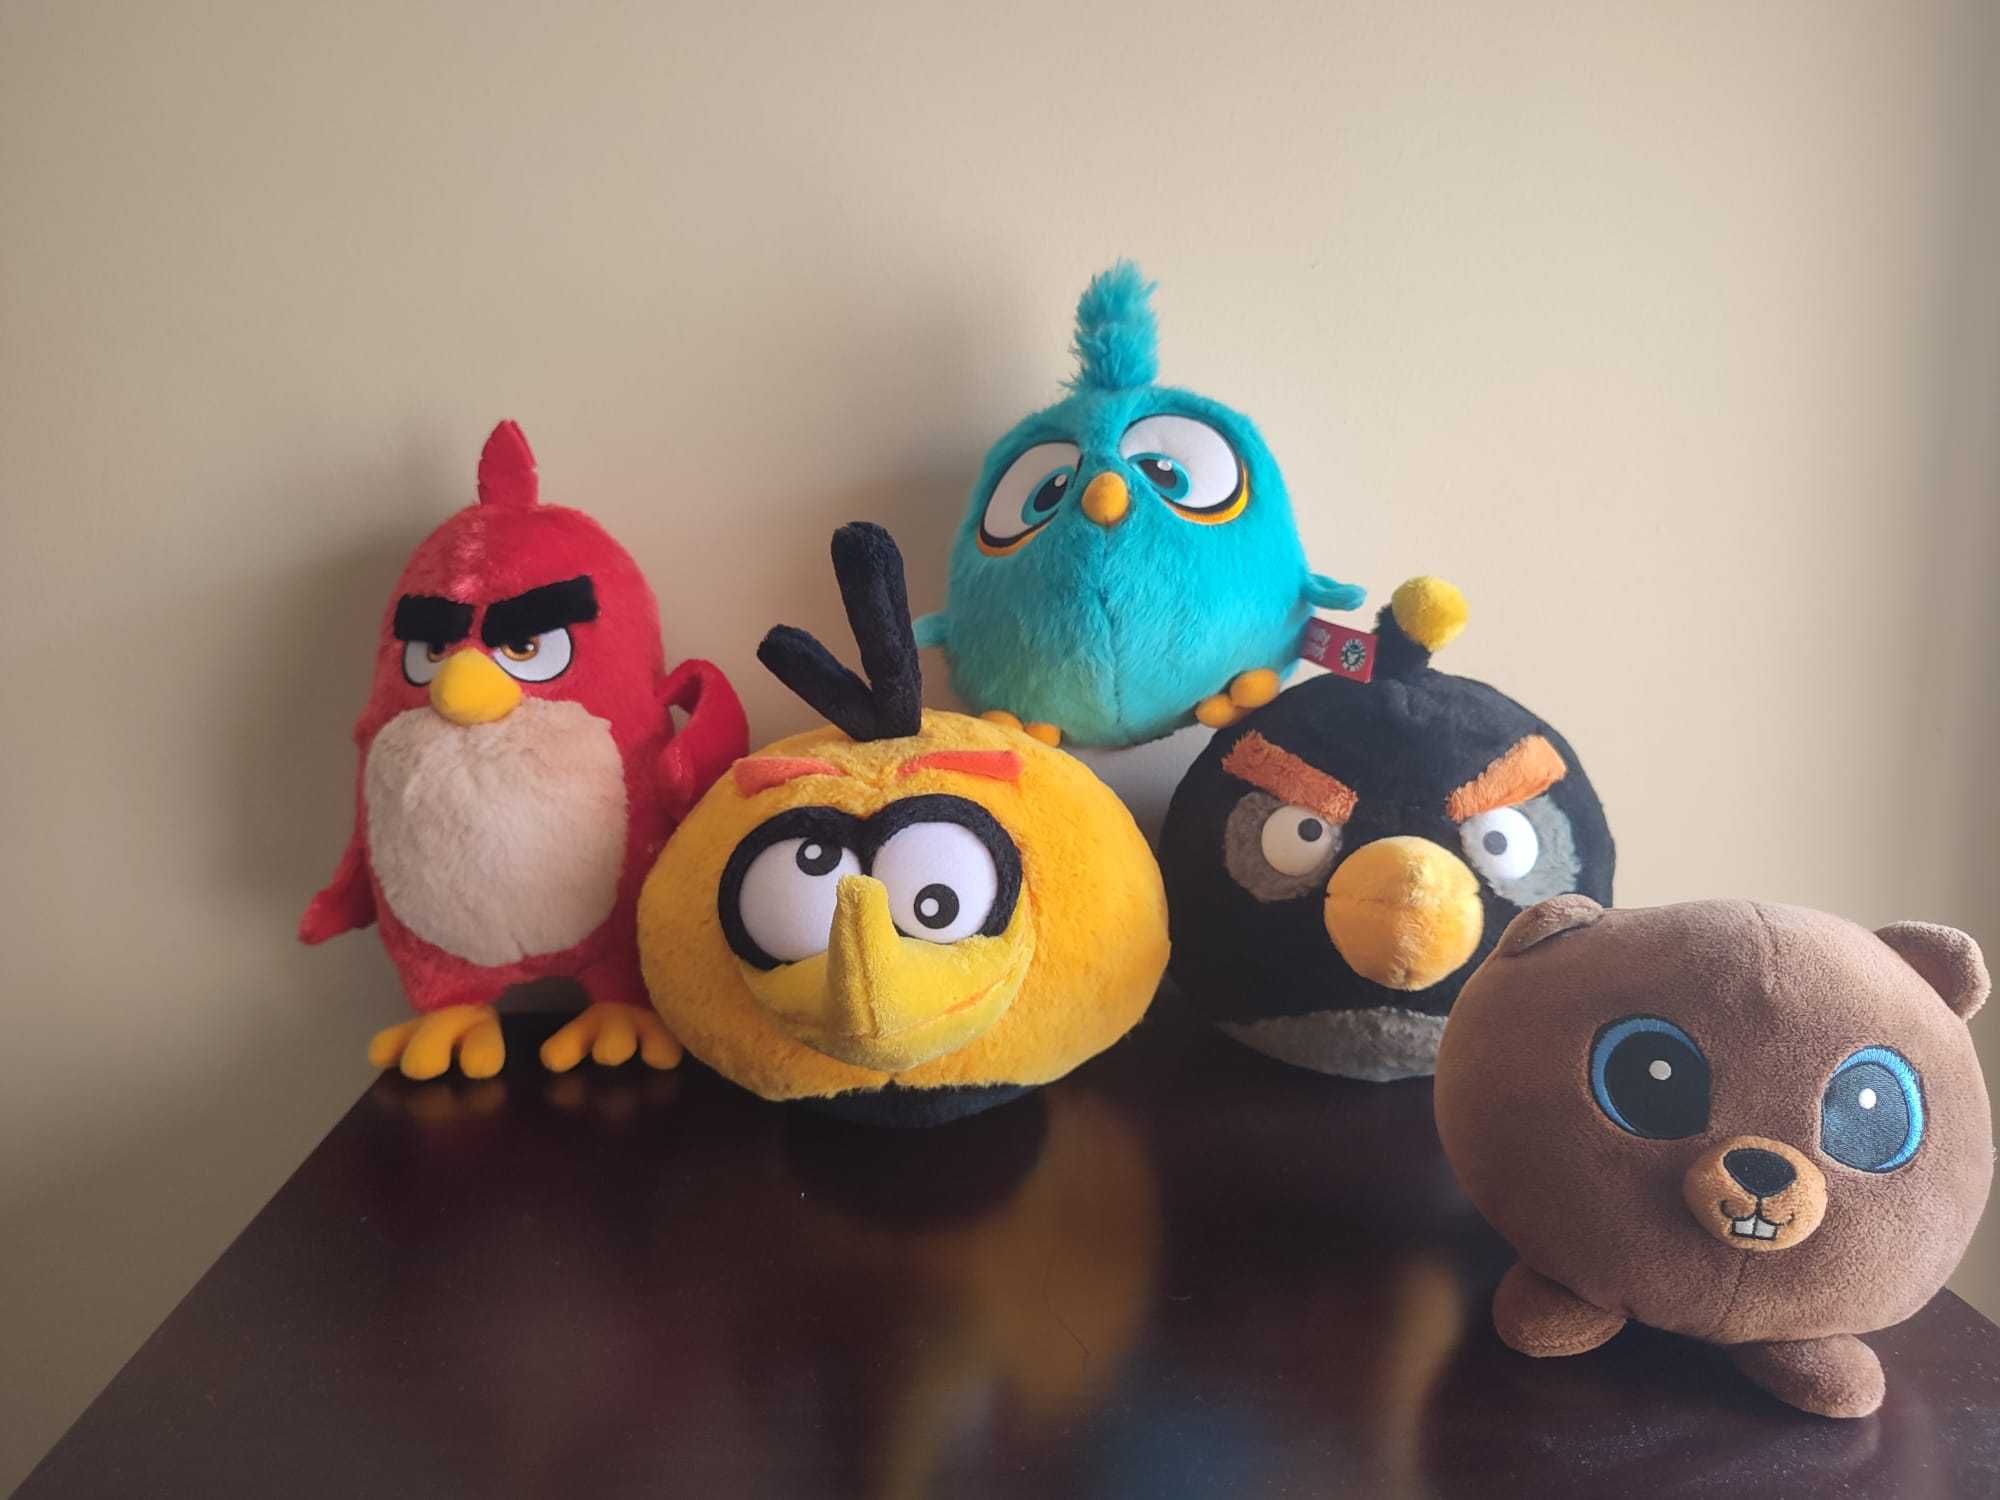 Peluches Angry Birds + Castor